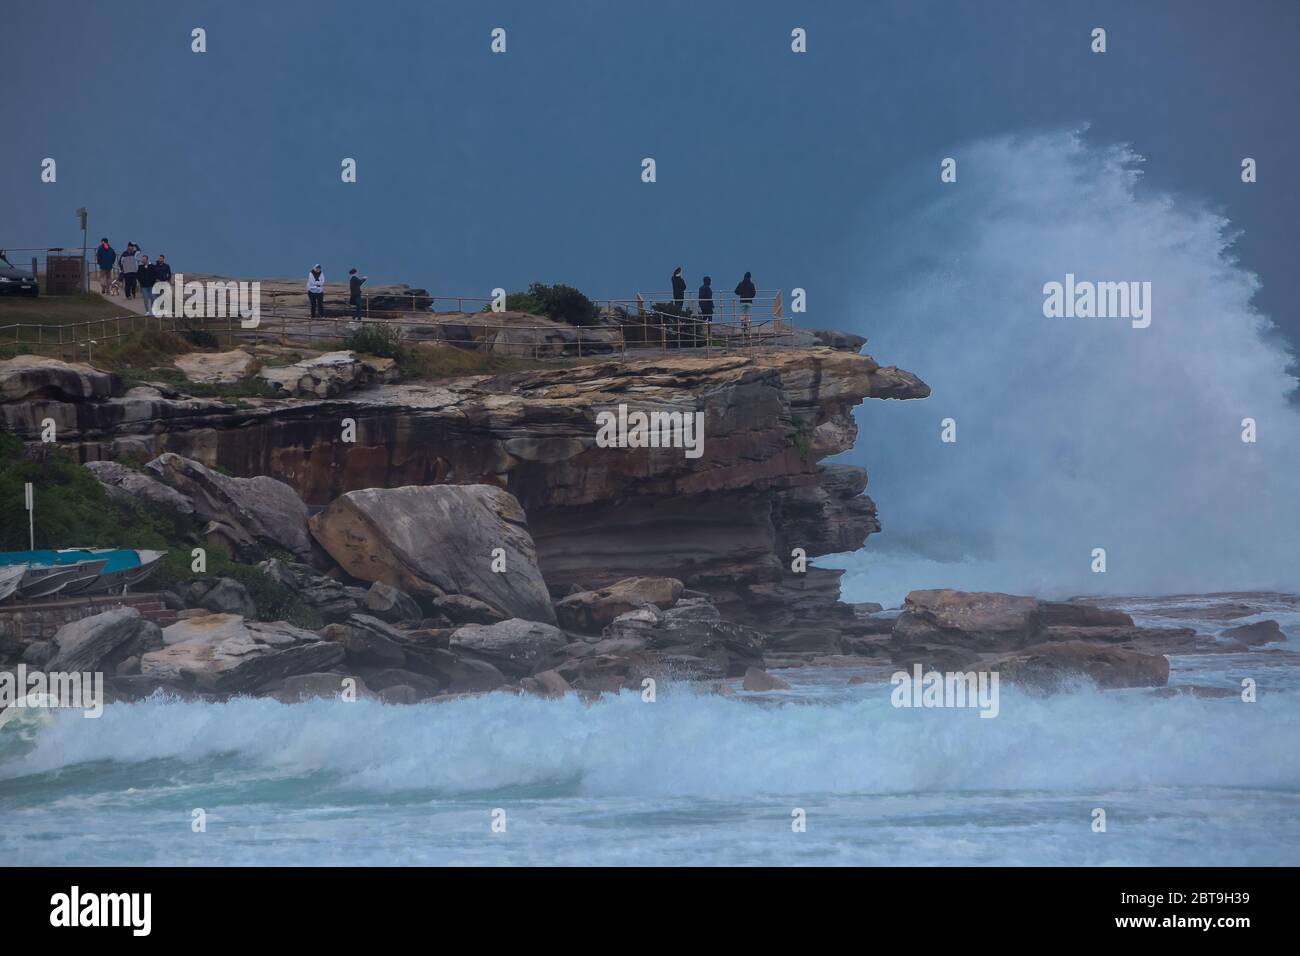 Sydney, Australia. Sunday 24th May 2020. Bondi Beach in Sydney's Eastern suburbs experiences very rough surf conditions today with  massive waves. People seen watching the rough surf conditions at Ben Buckler Point, Bondi. Credit Paul Lovelace/Alamy Live News Stock Photo